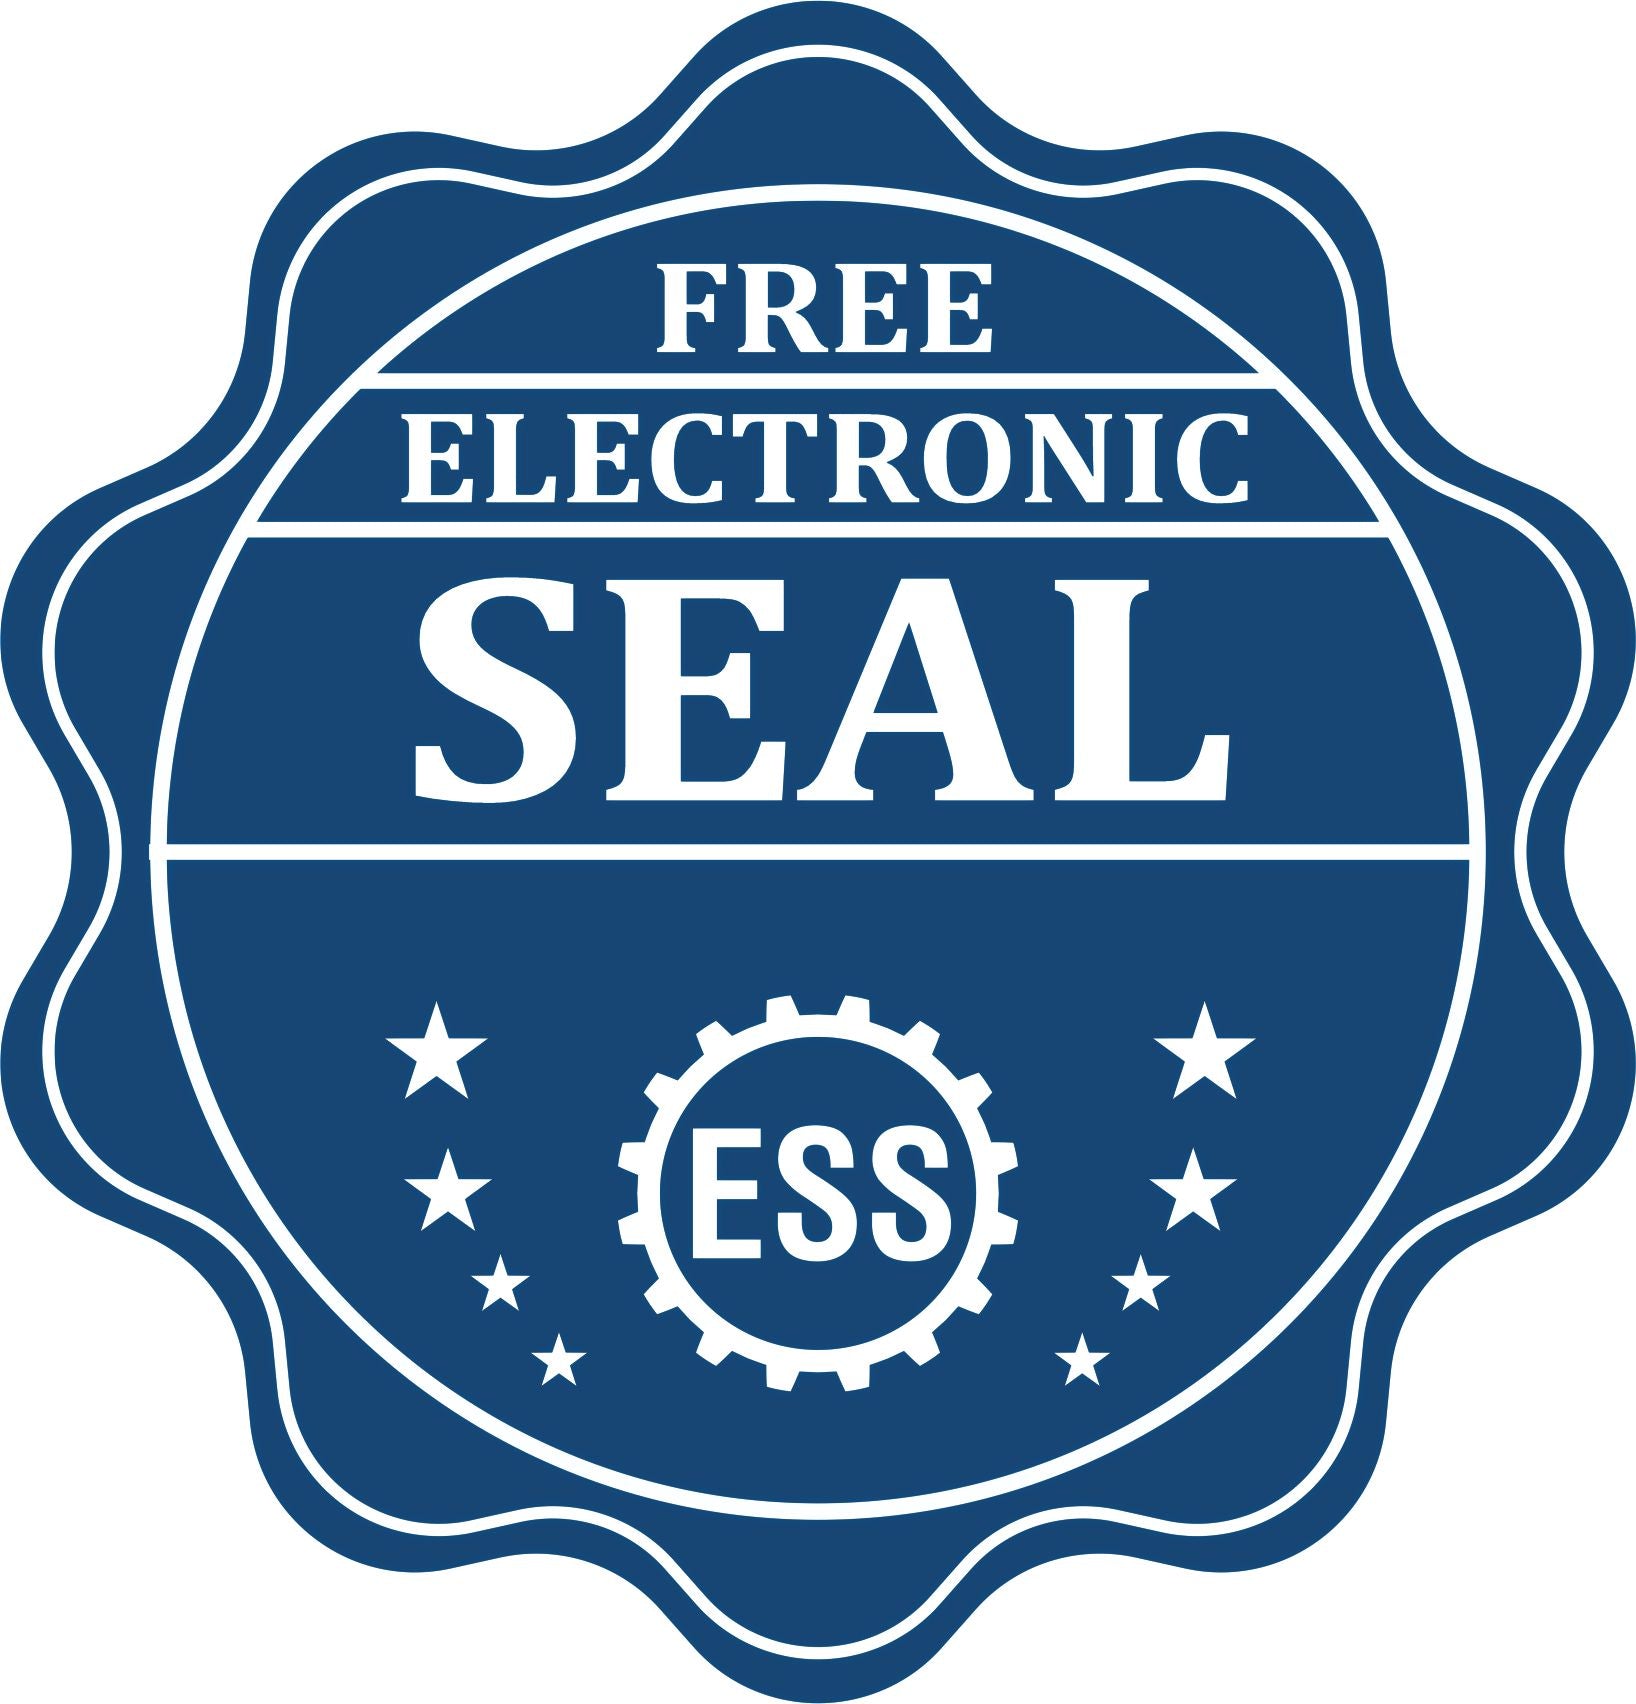 A badge showing a free electronic seal for the Heavy-Duty Utah Rectangular Notary Stamp with stars and the ESS gear on the emblem.